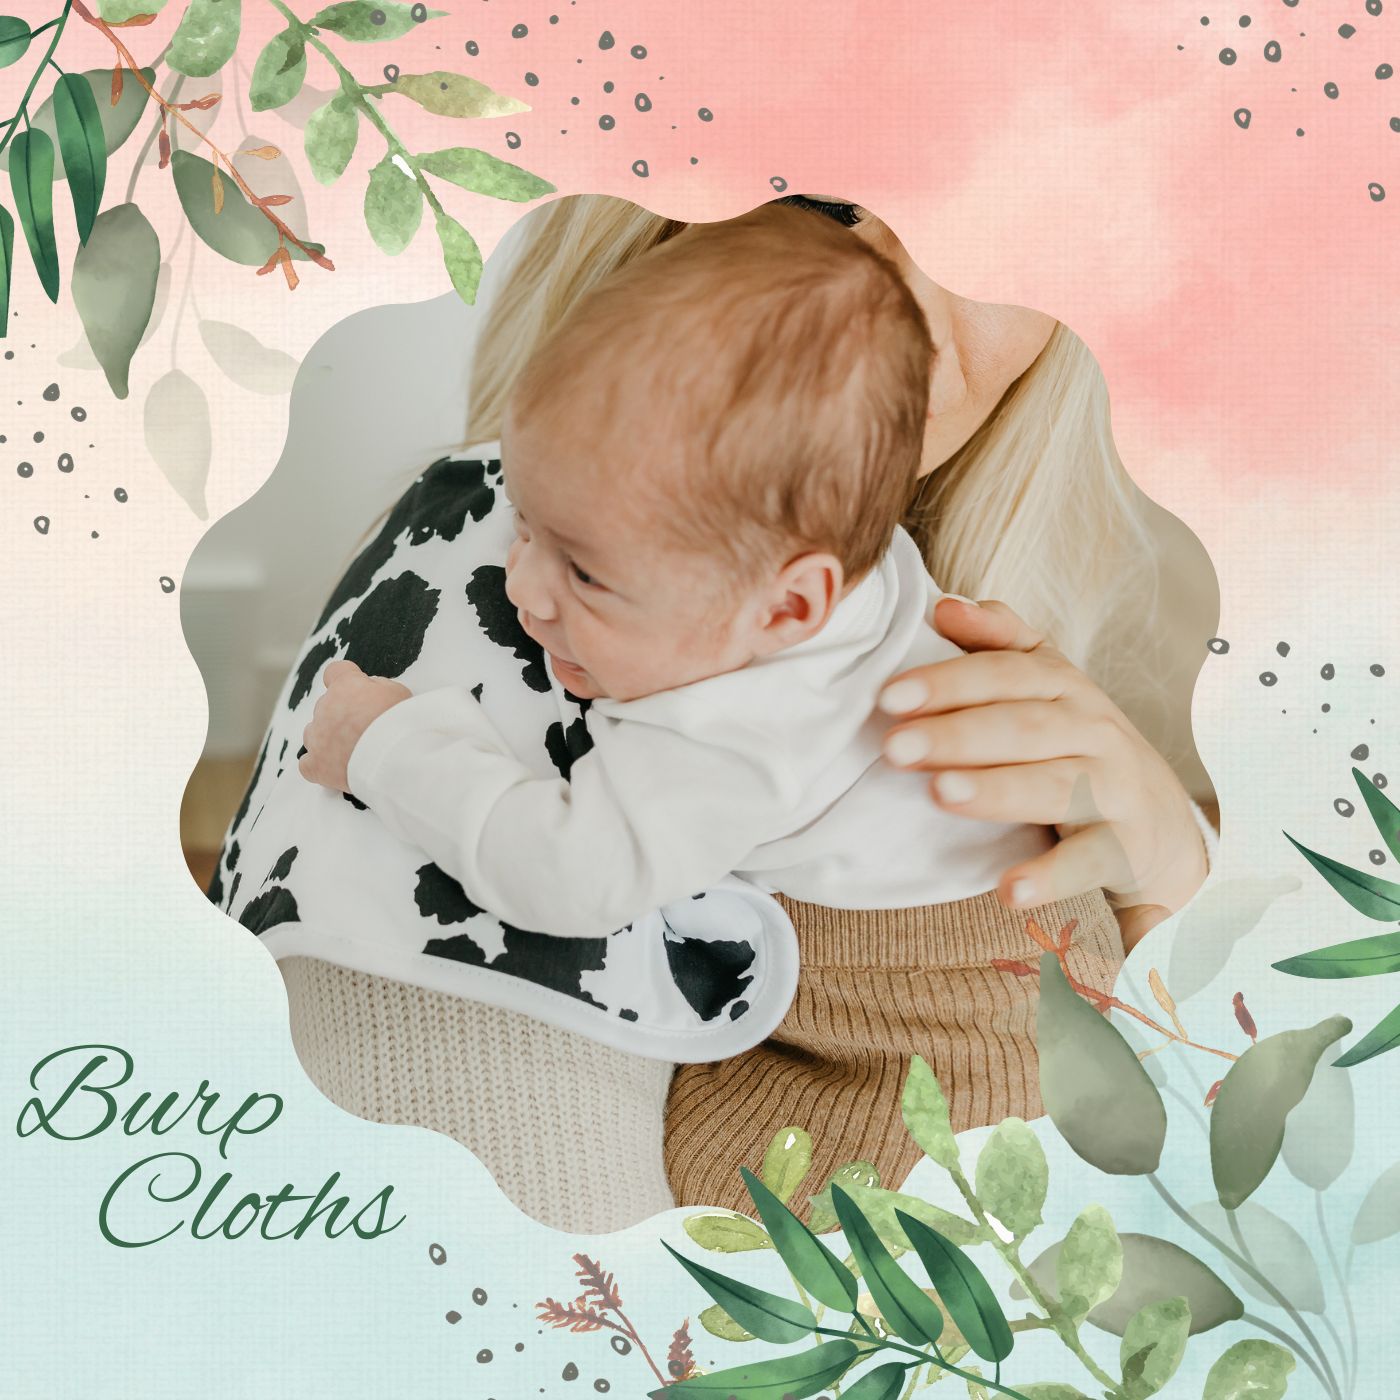 From drooling to beyond: The versatility of burp cloths for babies